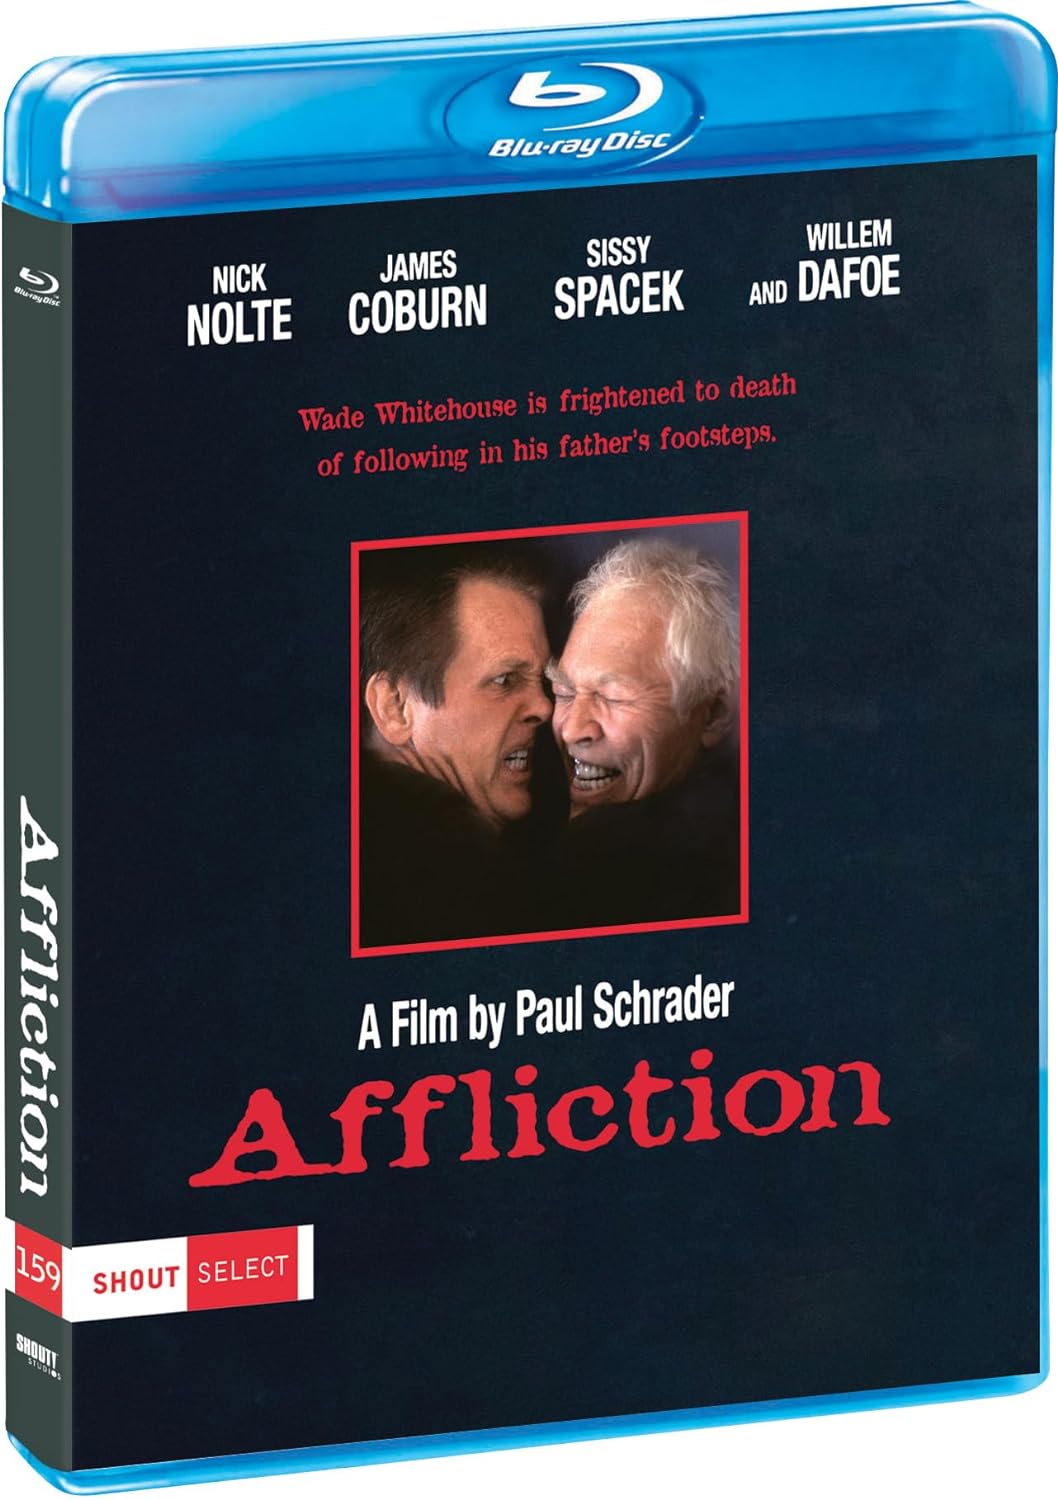 Affliction Blu-ray (Shout Factory) [Preorder]